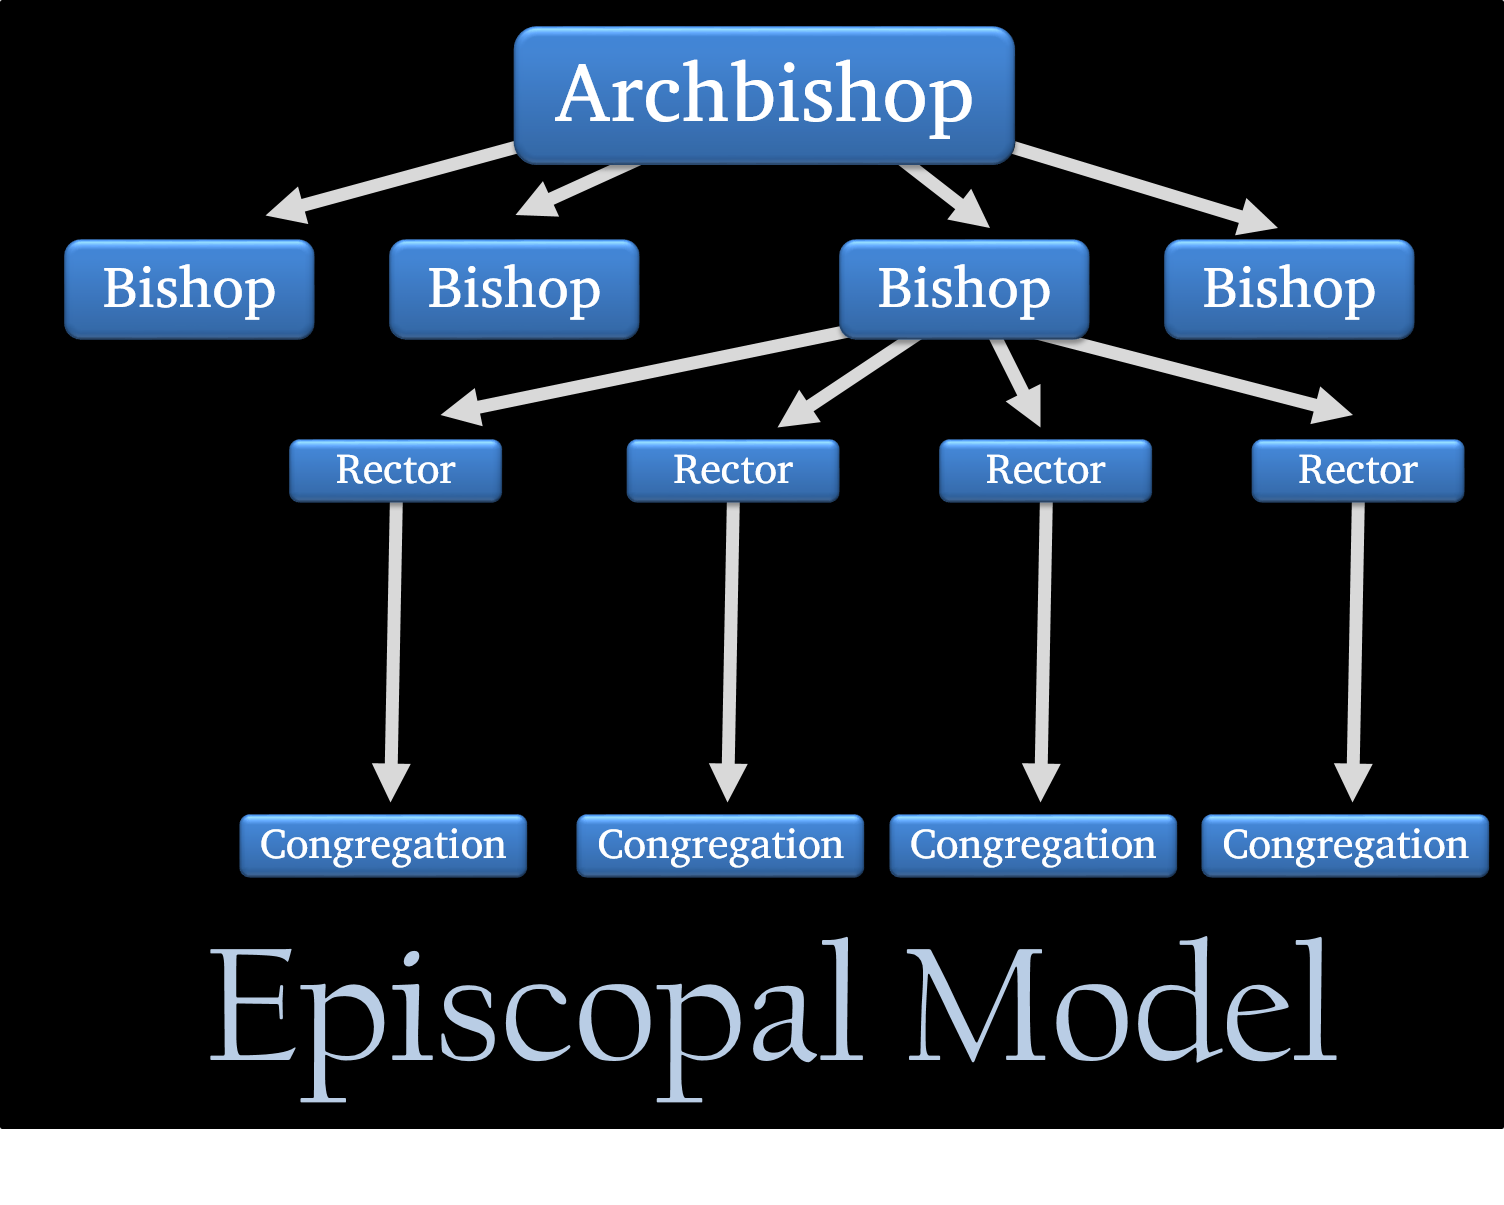 Ecclesiology, a study of the Church